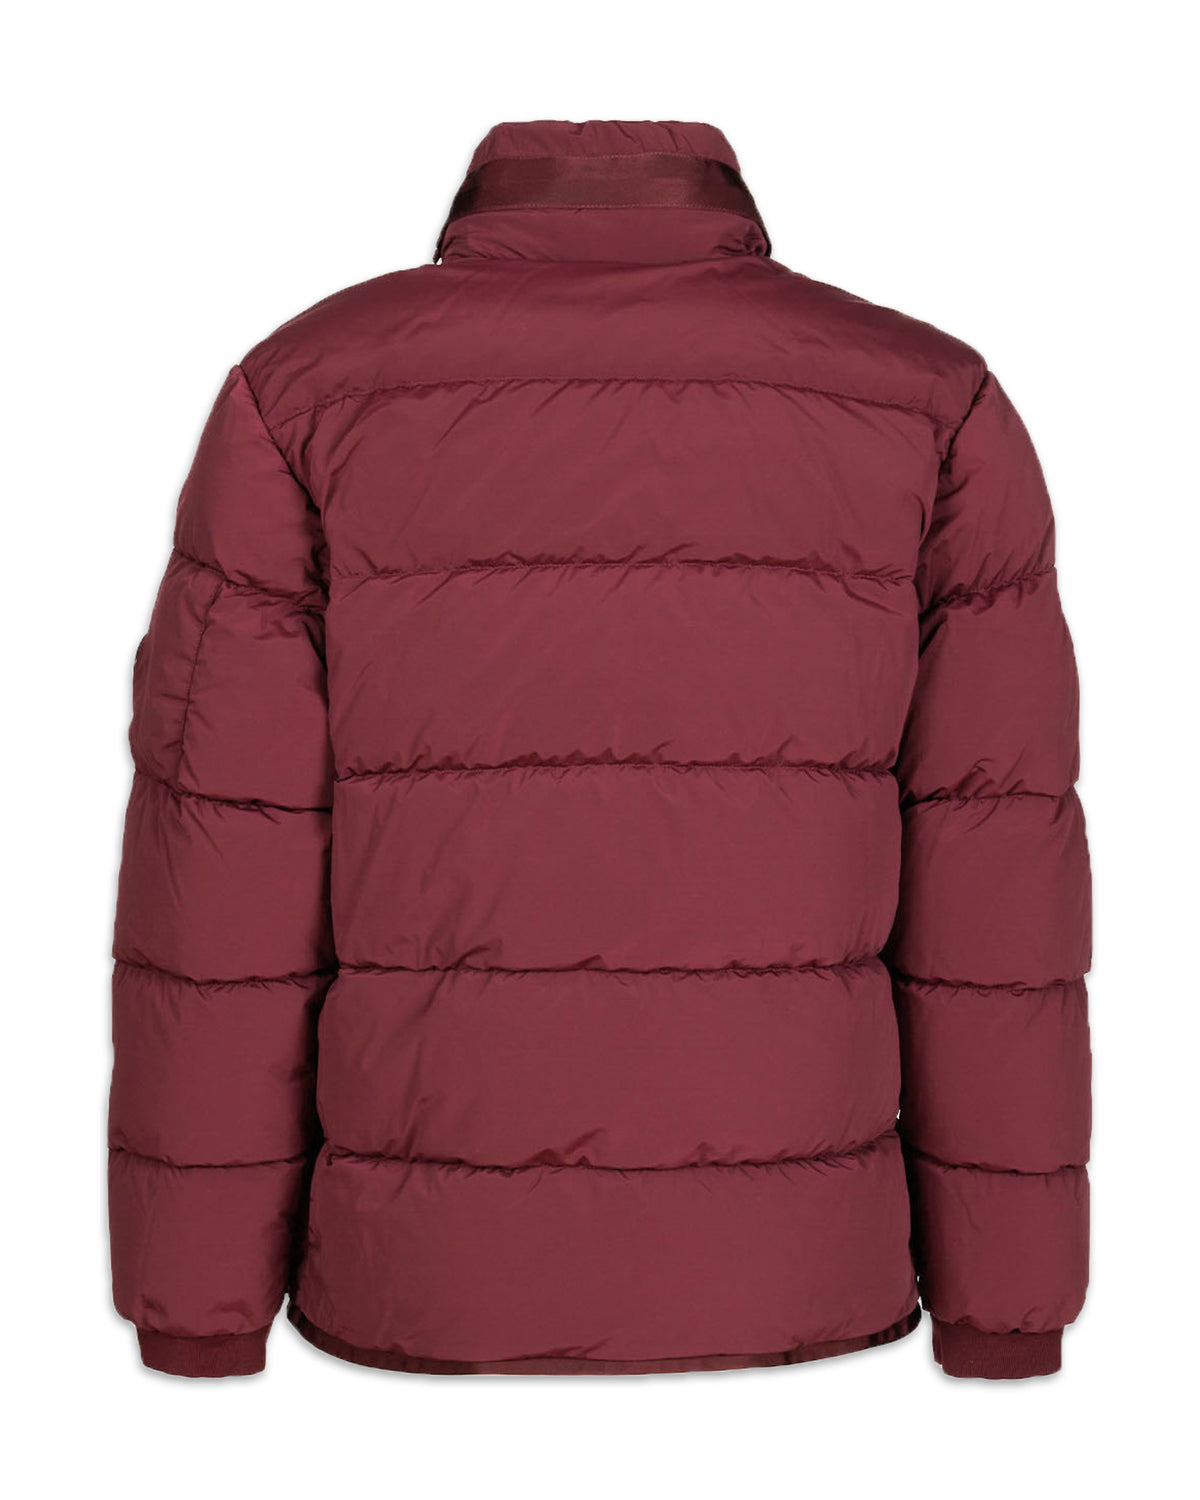 CP Company Outerwear Medium Jacket in Nycra R Port Royal